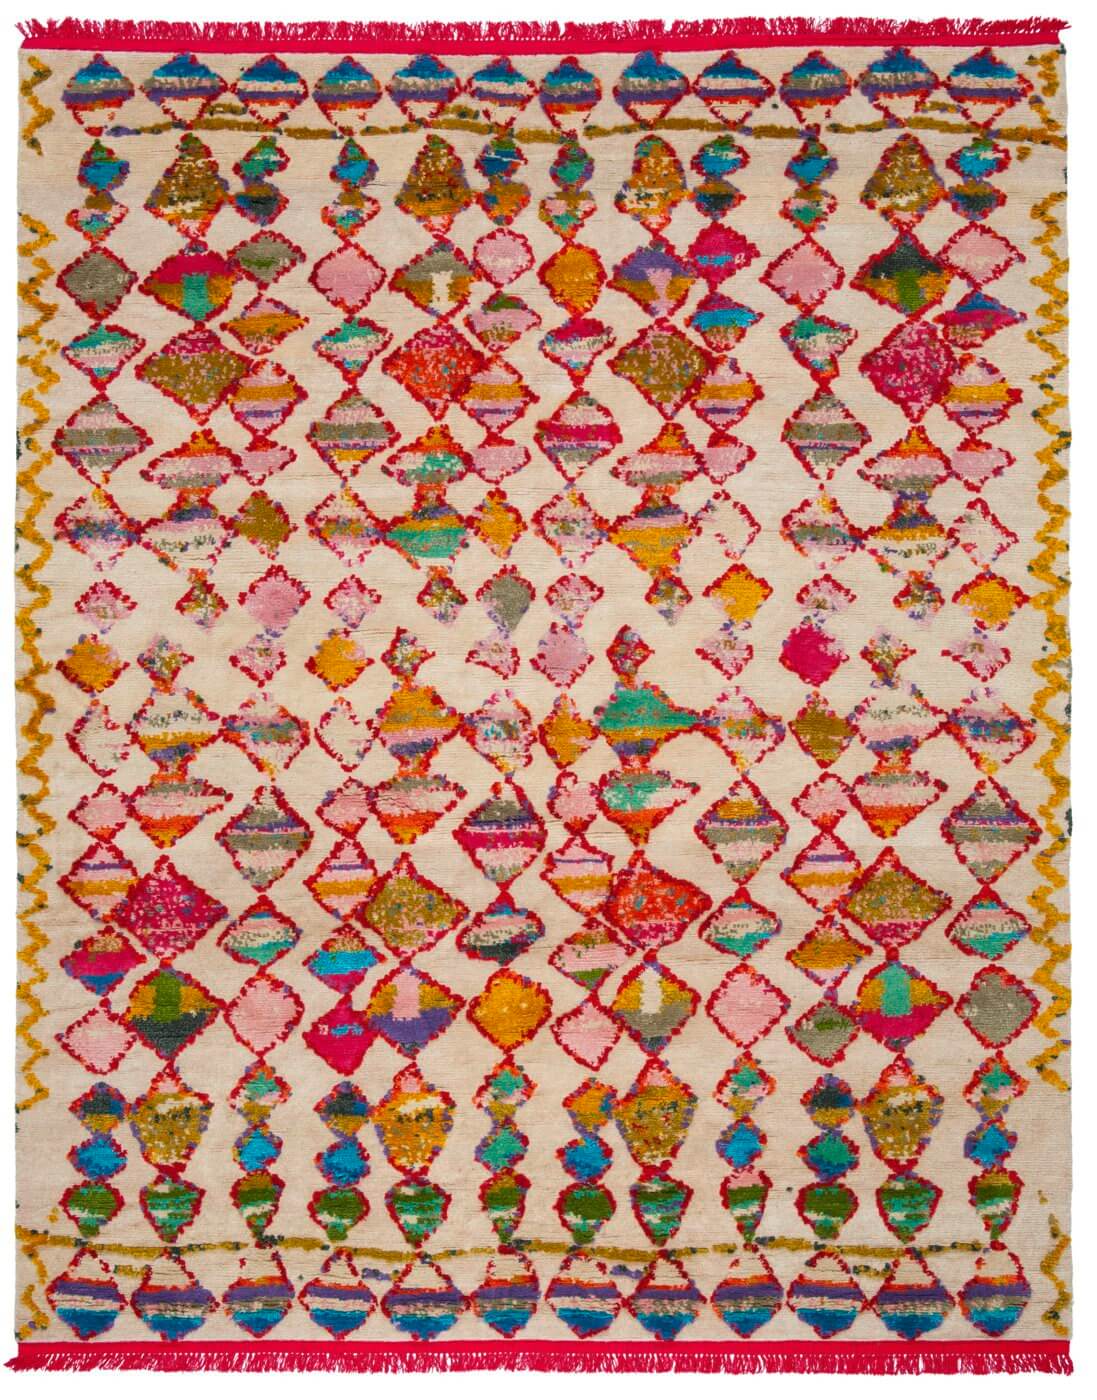 Hand-Woven Multicolored Luxurious Rug